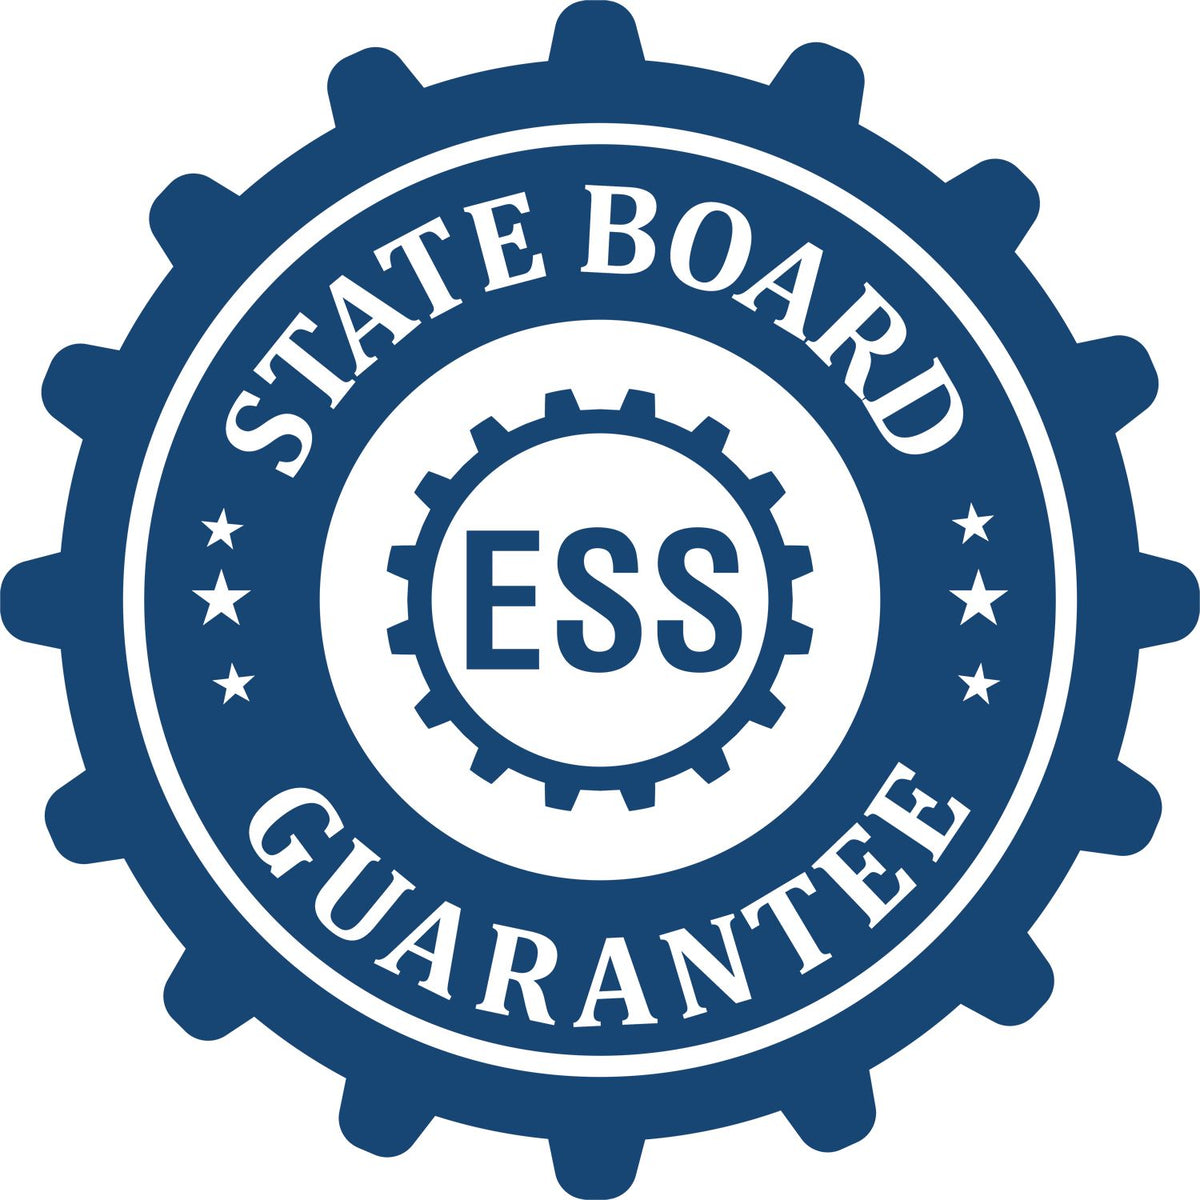 An emblem in a gear shape illustrating a state board guarantee for the South Dakota Engineer Desk Seal product.